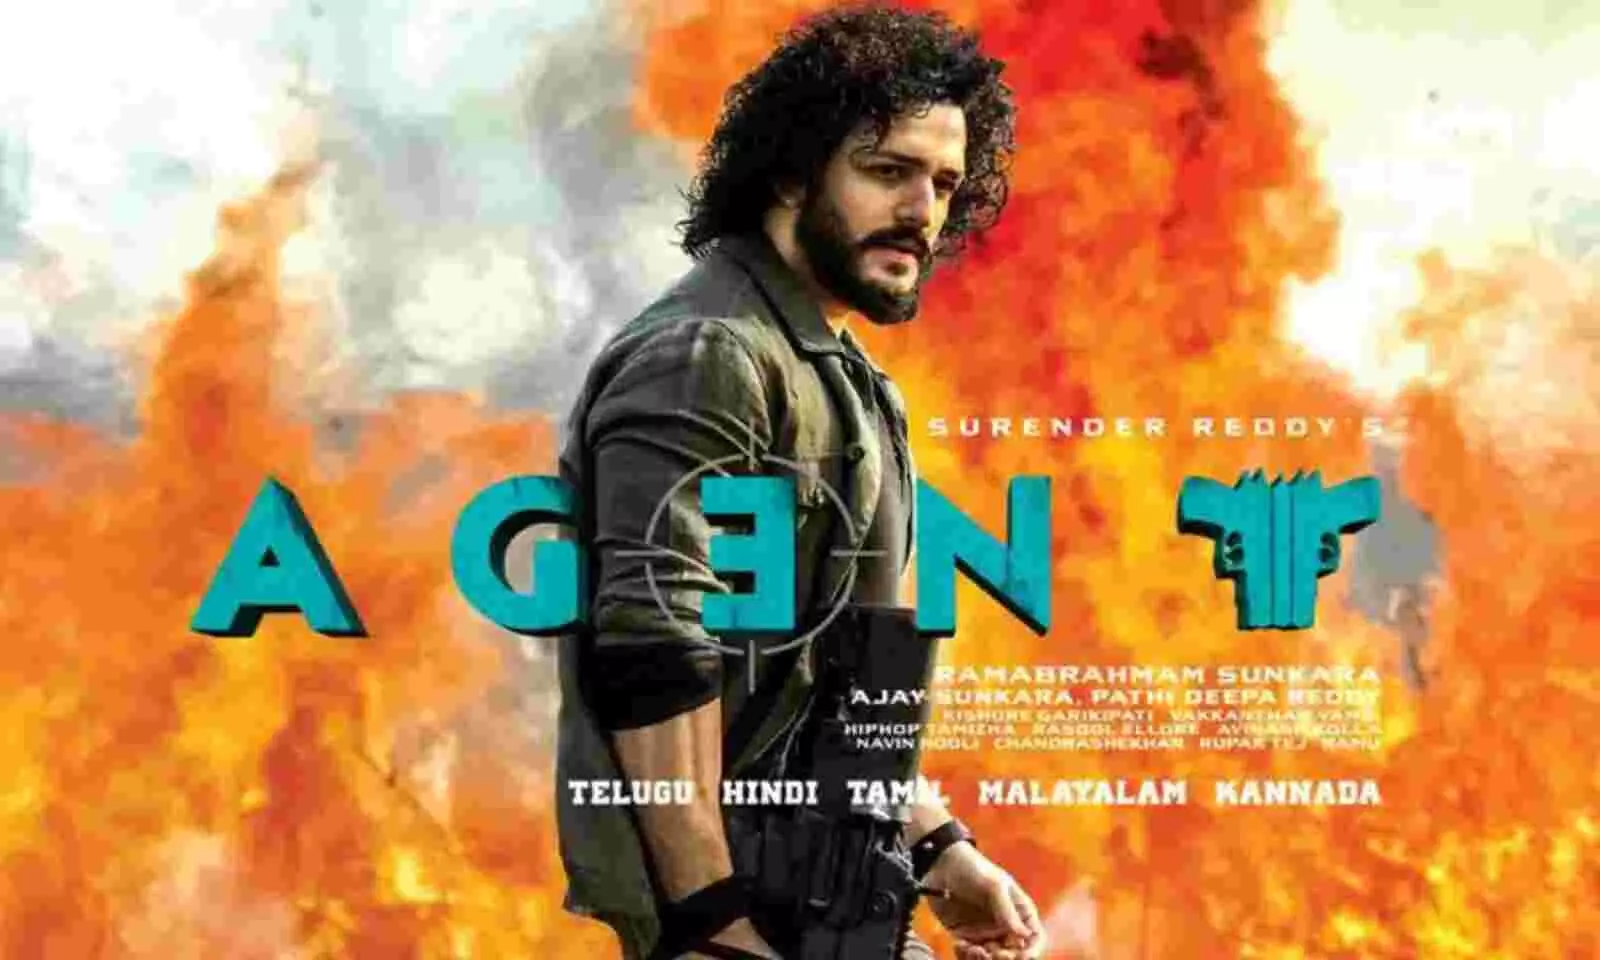 Agent Box Office Collection Day 4: Akhil Akkinenis Film Struggles to Reach Double Digits, Producer Anil Sunkara Responds